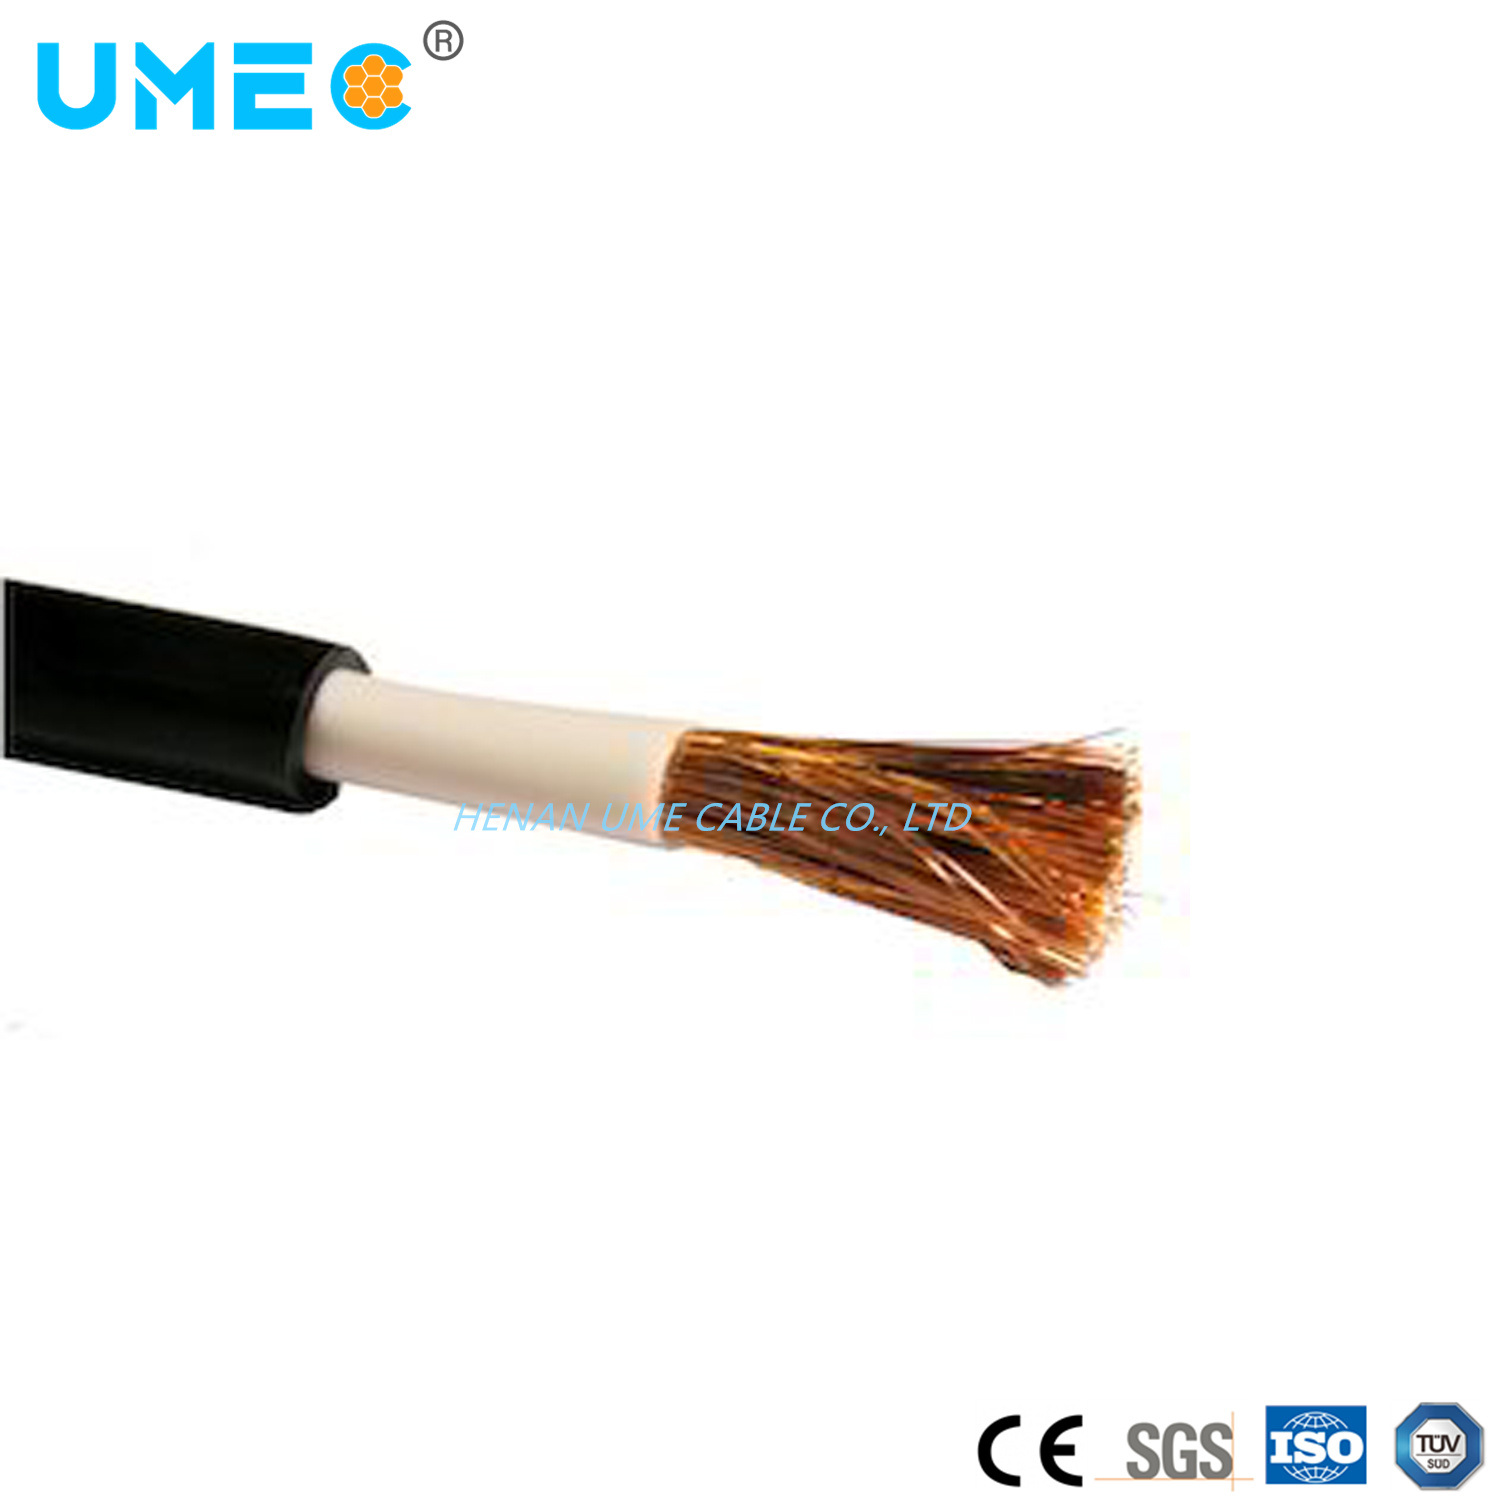 Electrical CPE/Neoprene/Silicone/PVC/PVC Elastomers Arc Welding Cable 50mm2 Electric Cable Wire